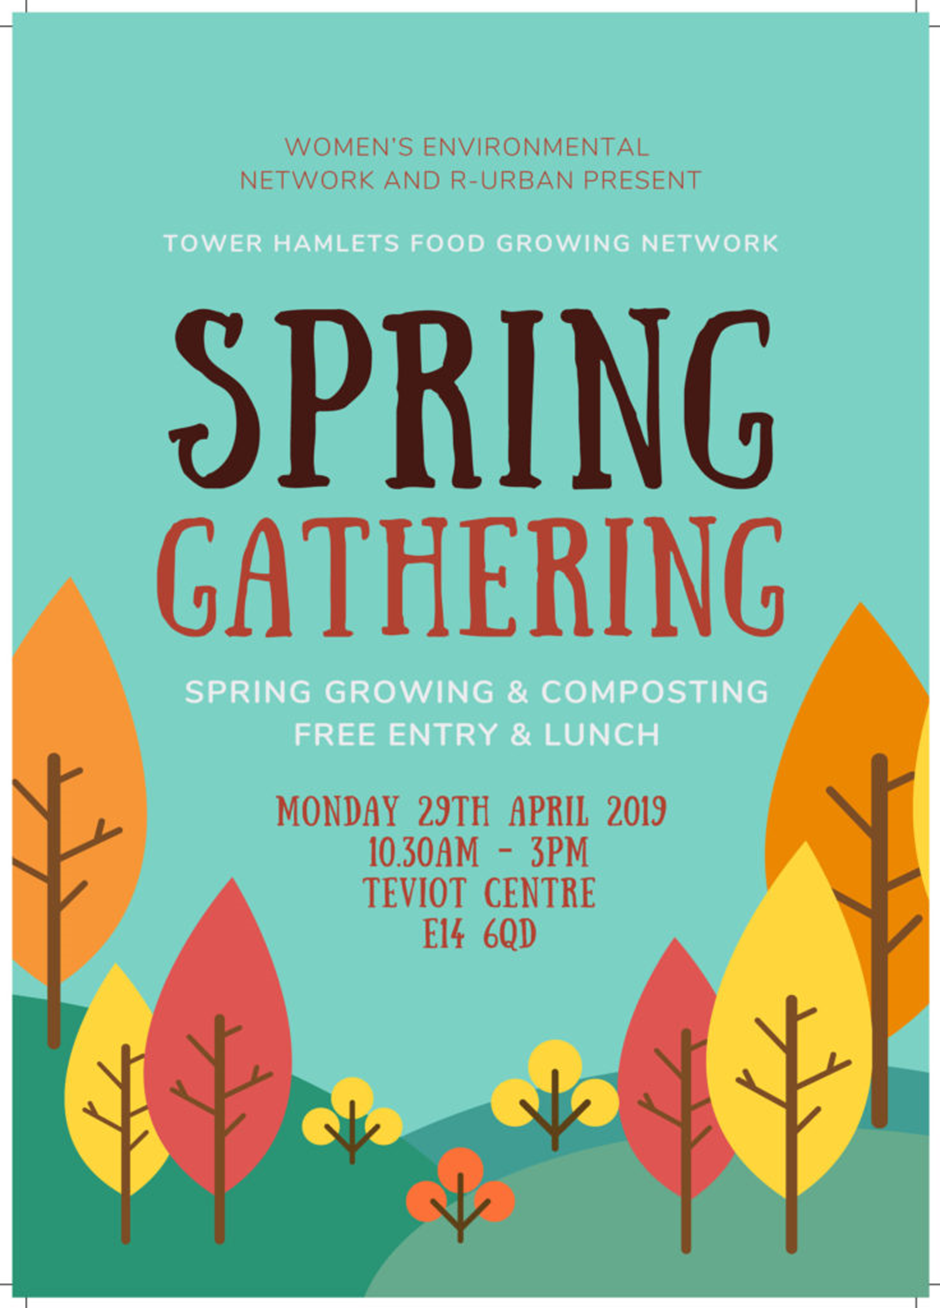 Come and meet Quantum Waste at Tower Hamlets Food Growing Network’s Spring Gathering on 29 April 201